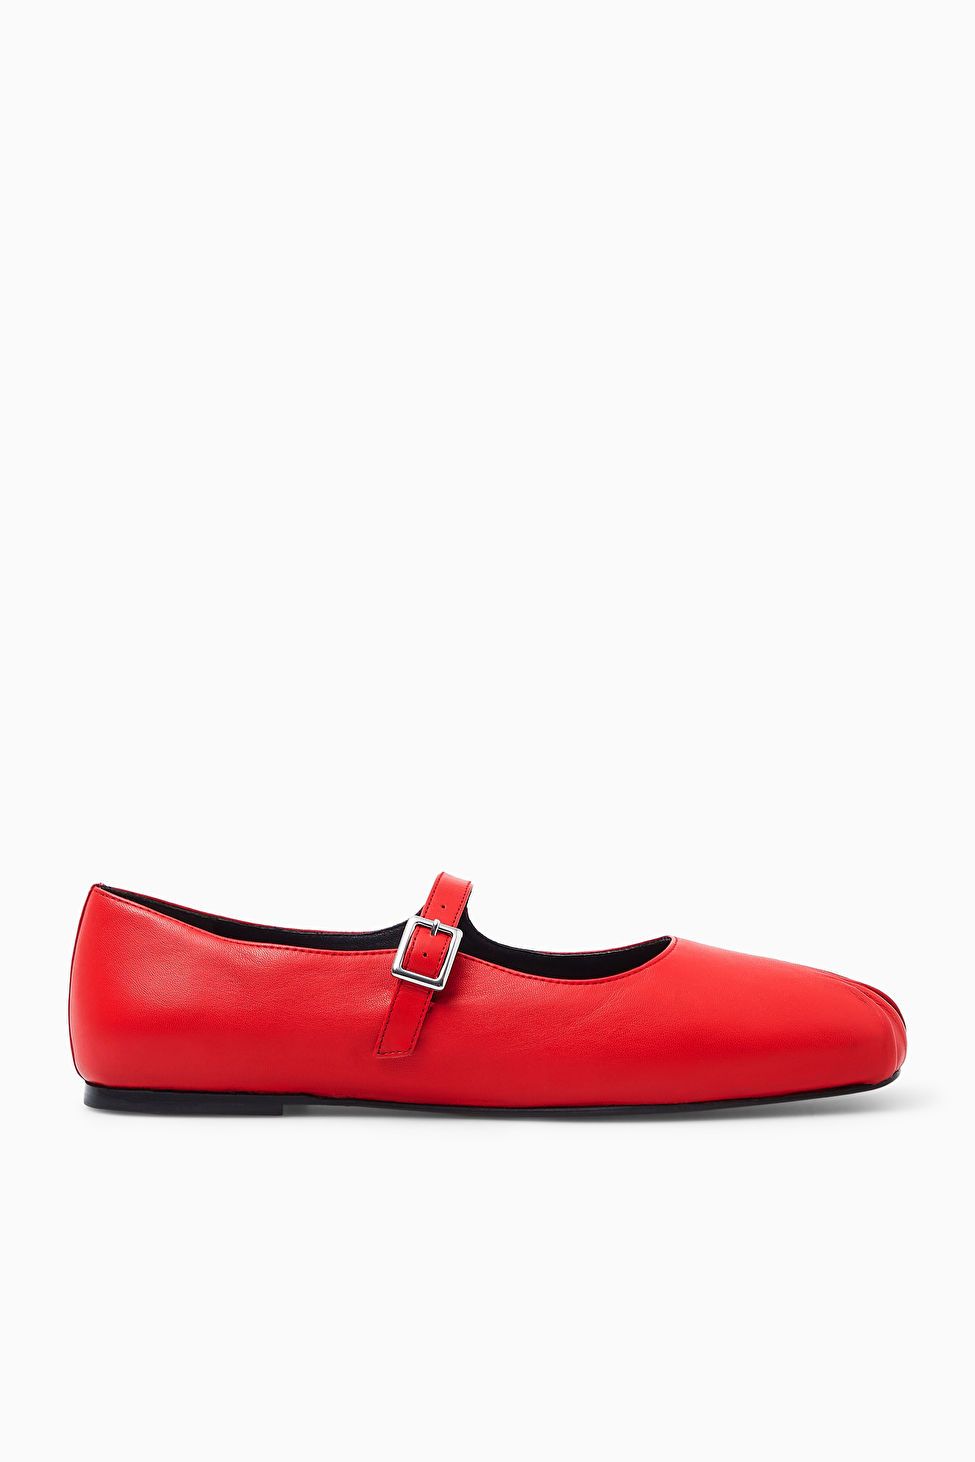 PLEATED LEATHER MARY-JANE BALLET FLATS | COS UK